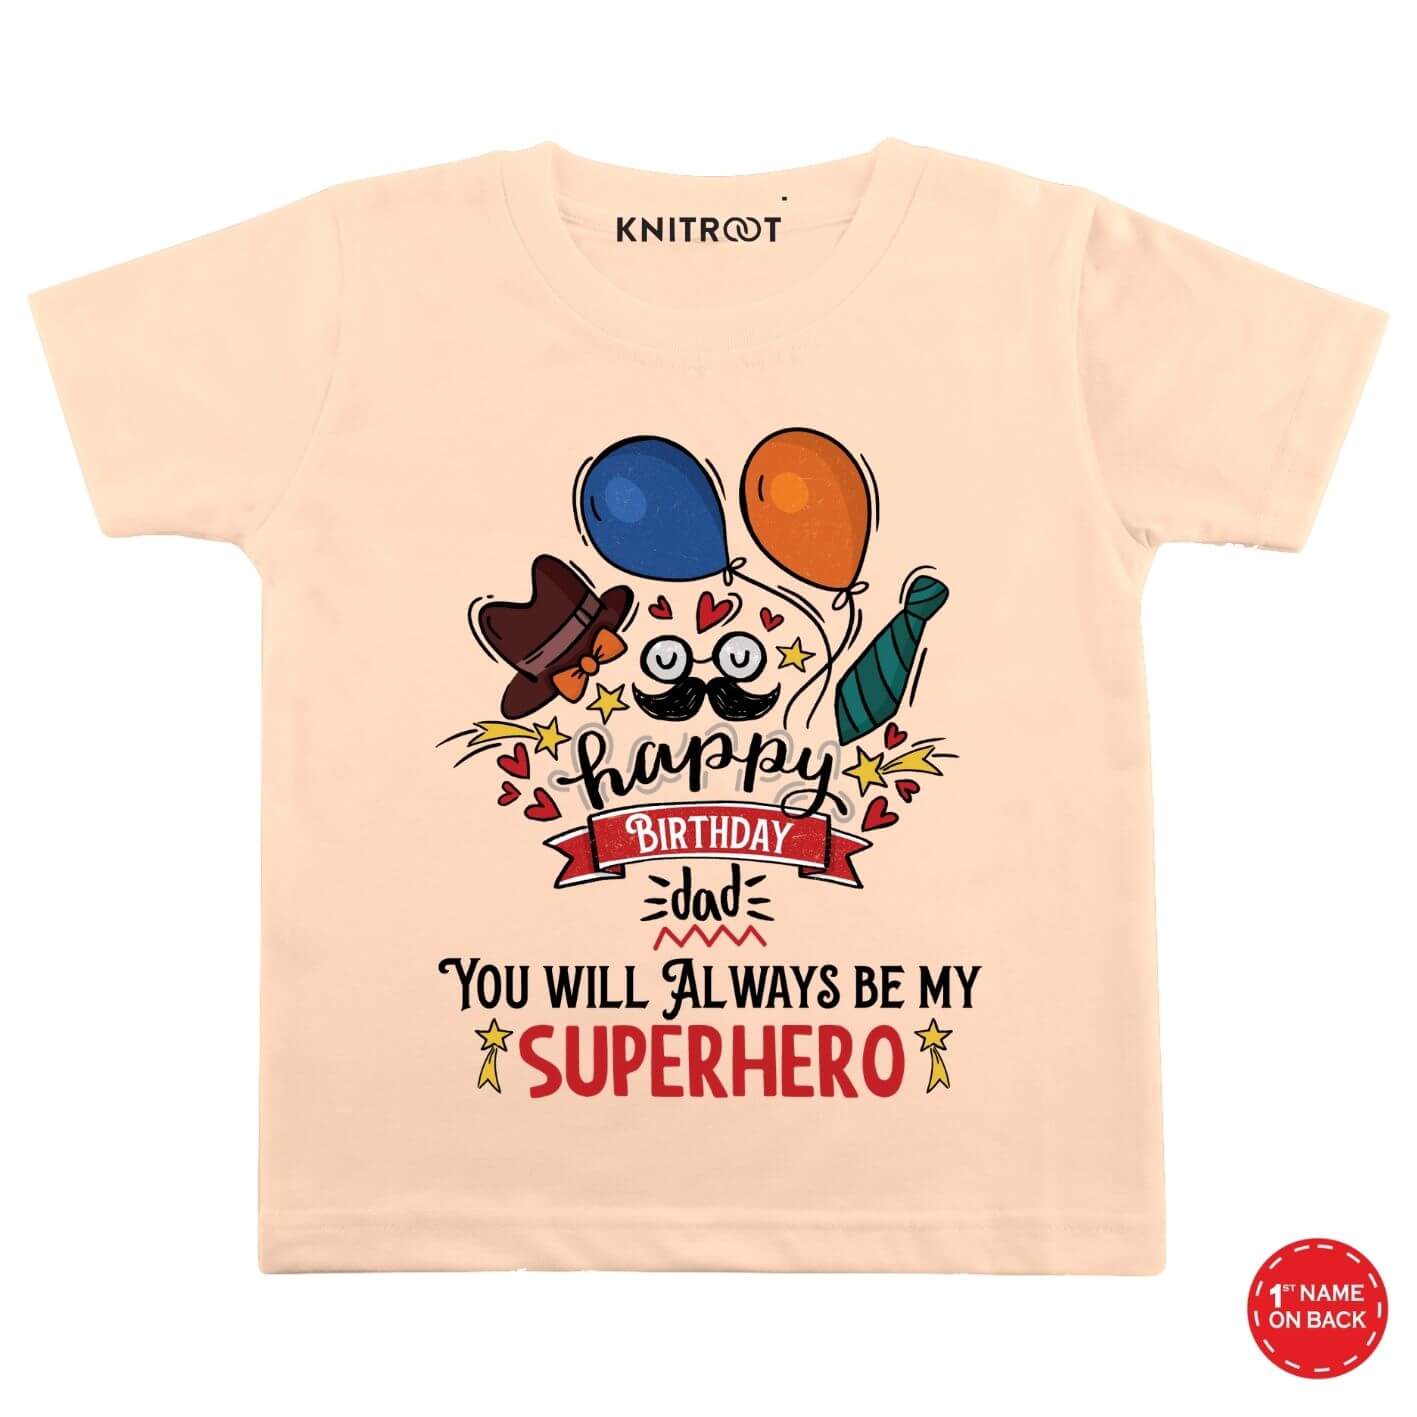 My Superhero T shirt/Onesie/Romper | Special KNITROOT | Outfits Birthday